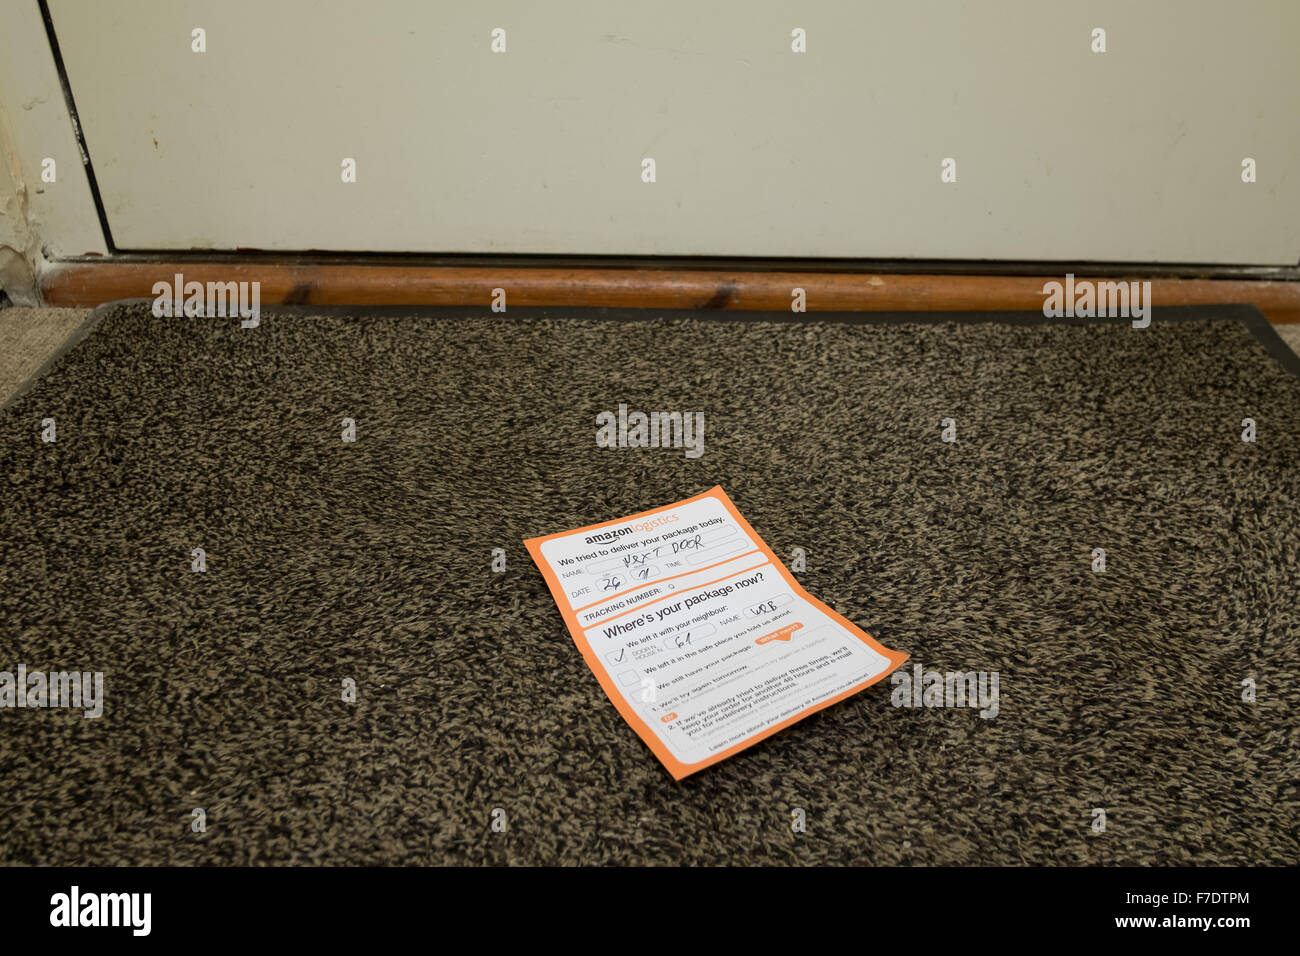 Delivery Note High Resolution Stock Photography and Images - Alamy